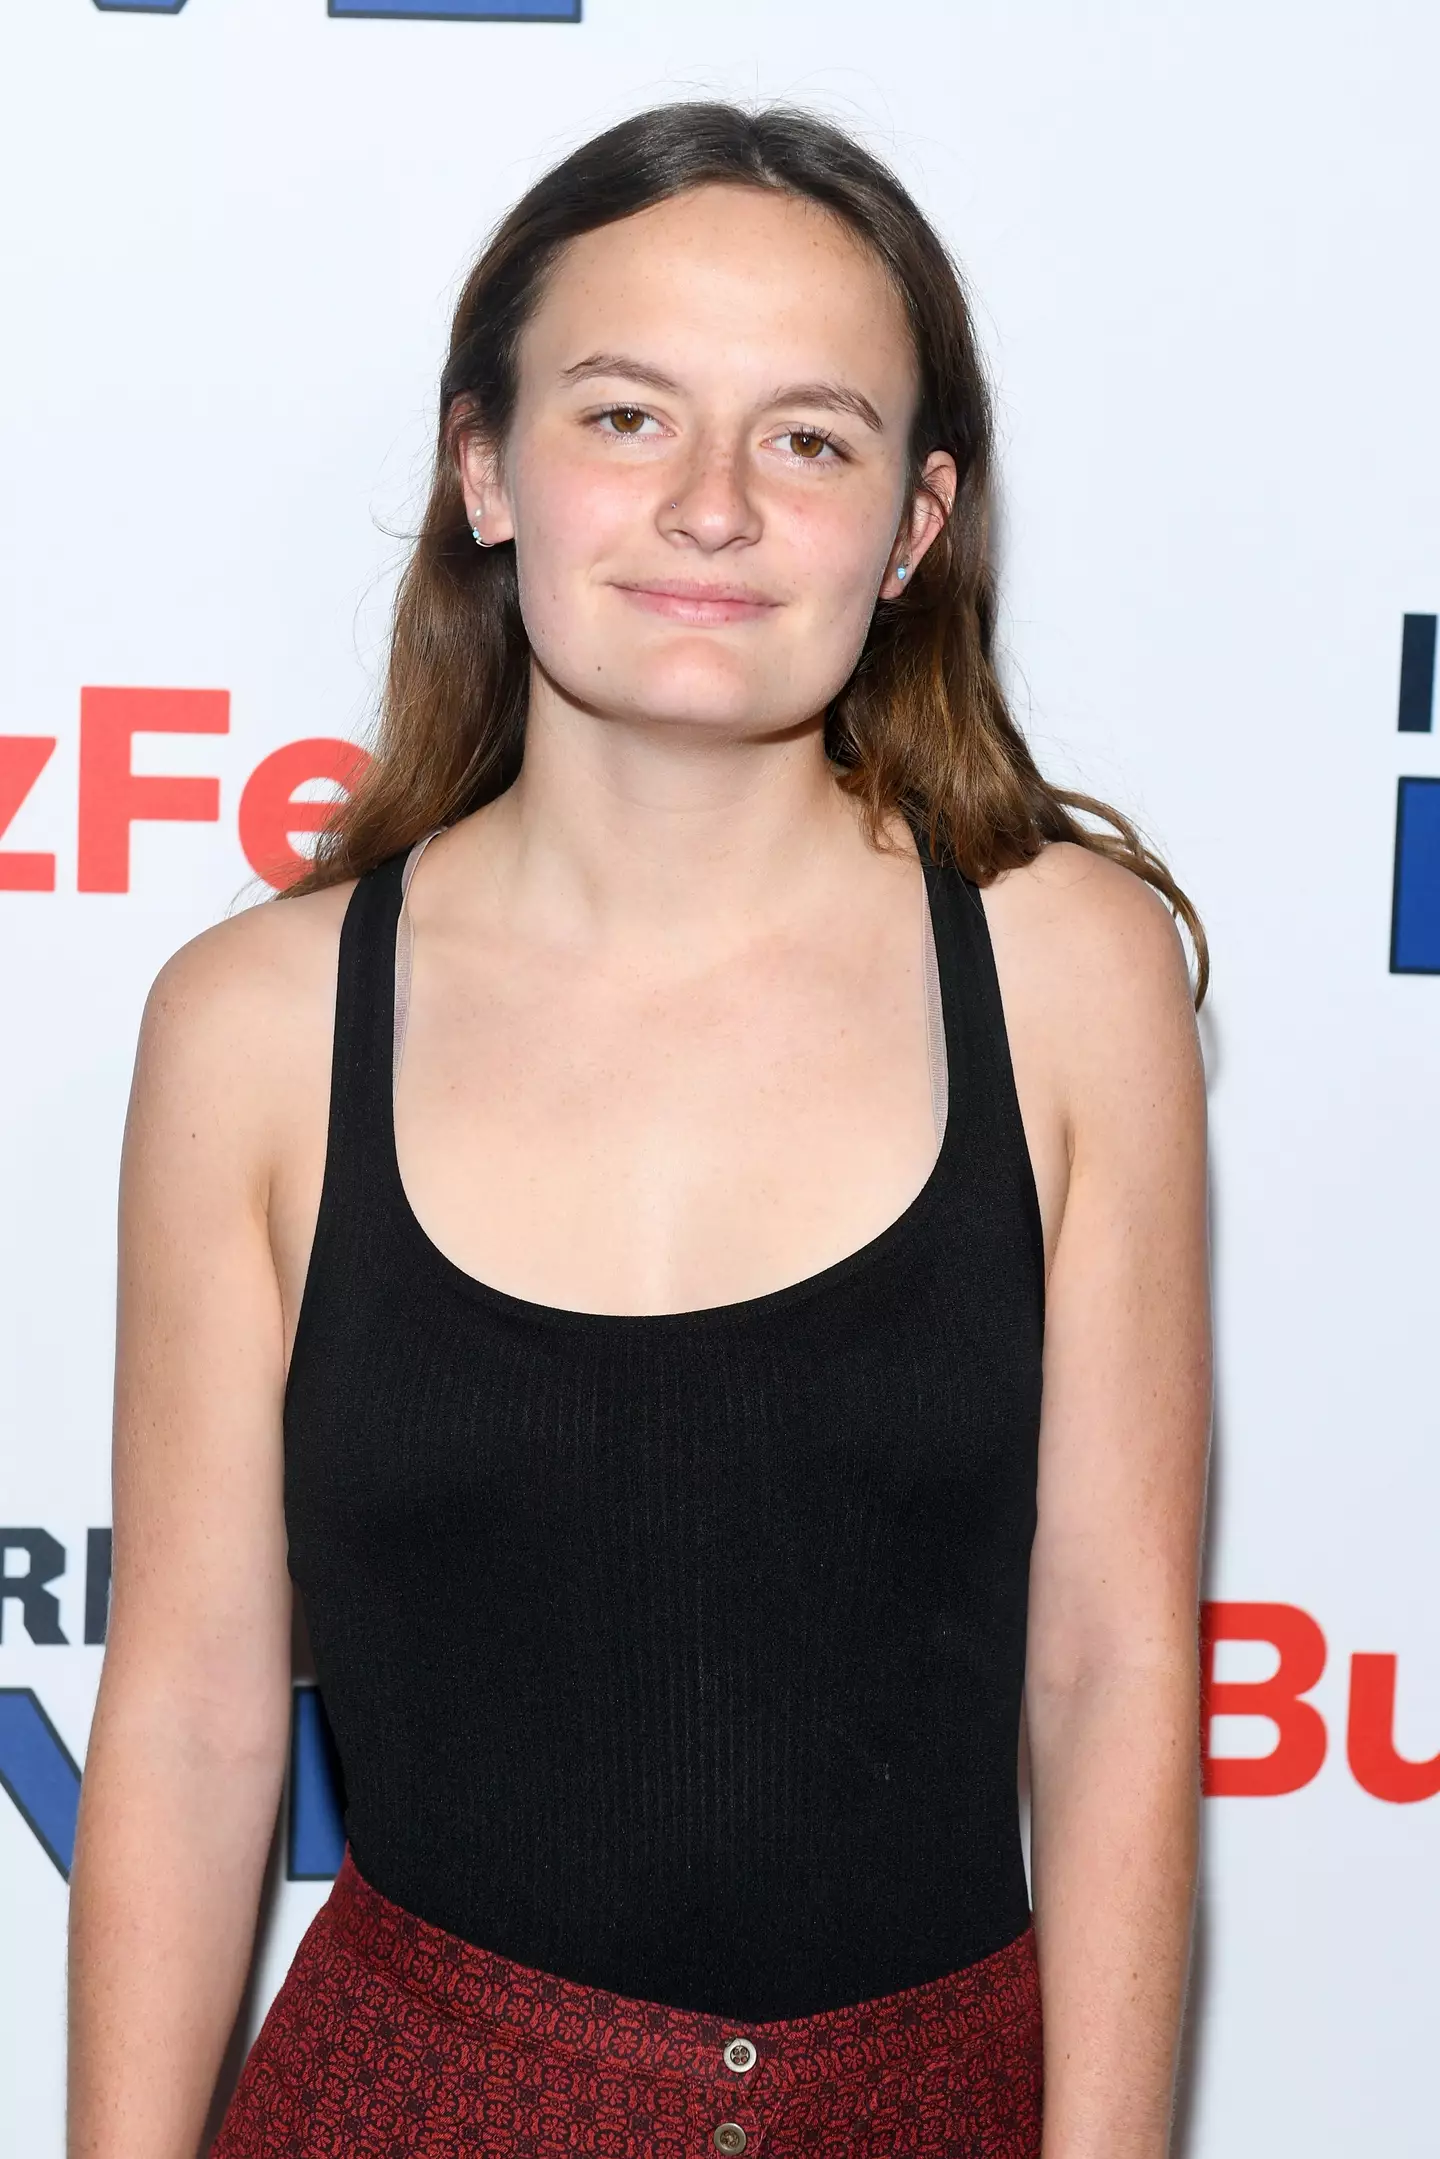 Zoë Roth is now a fully grown adult. (Noam Galai/Getty Images for BuzzFeed)